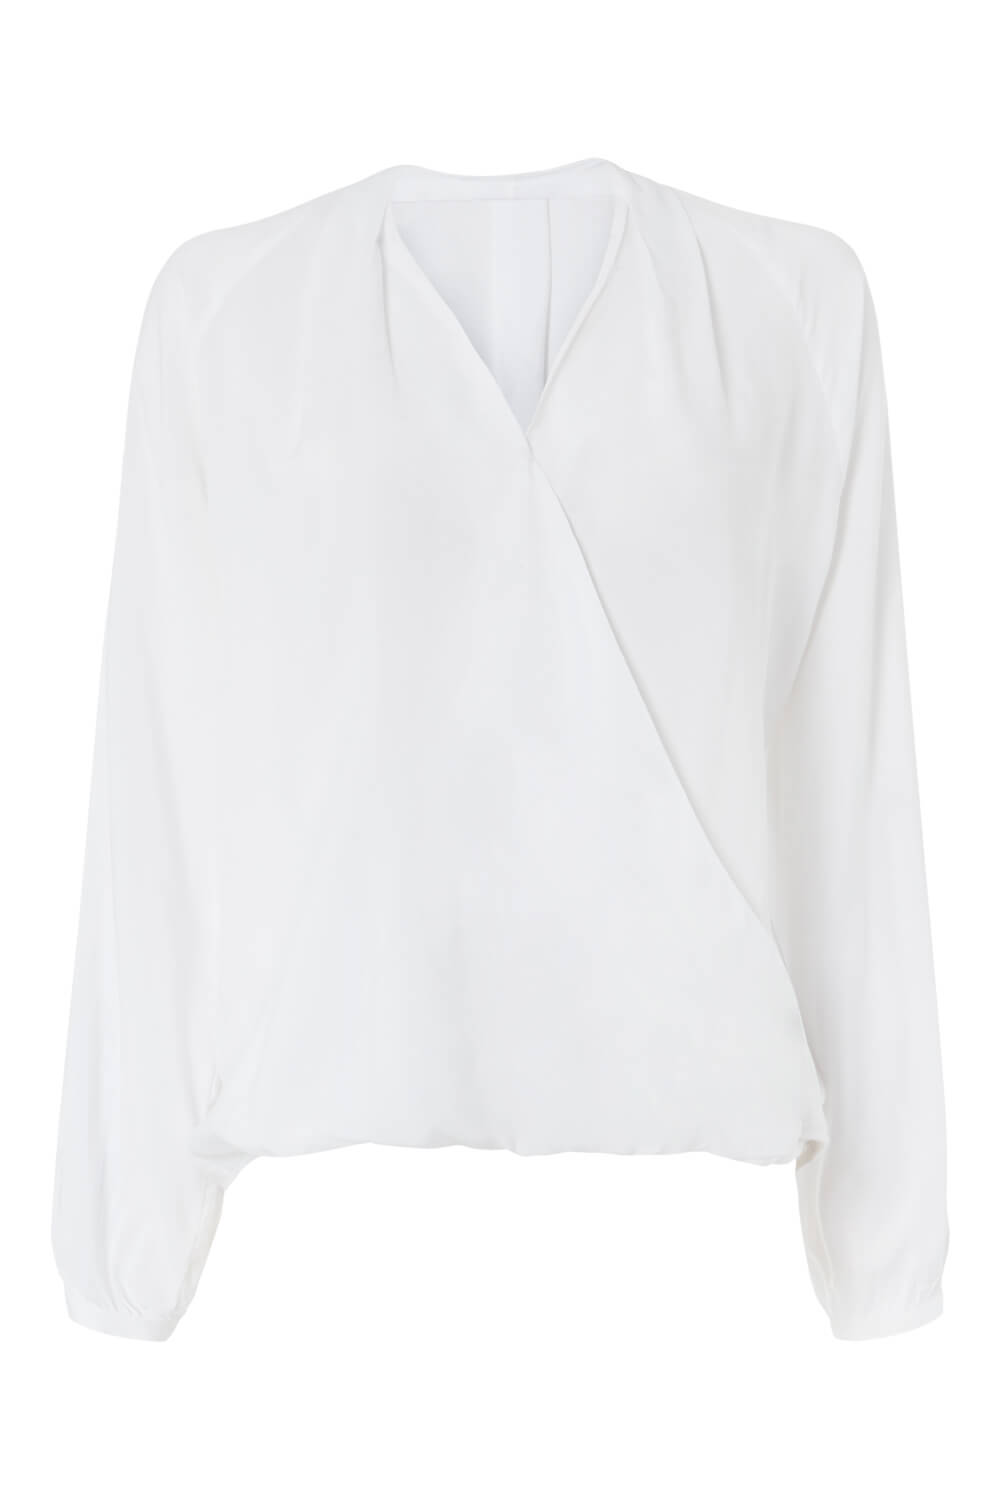 White V Neck Wrap Front Top , Image 4 of 4